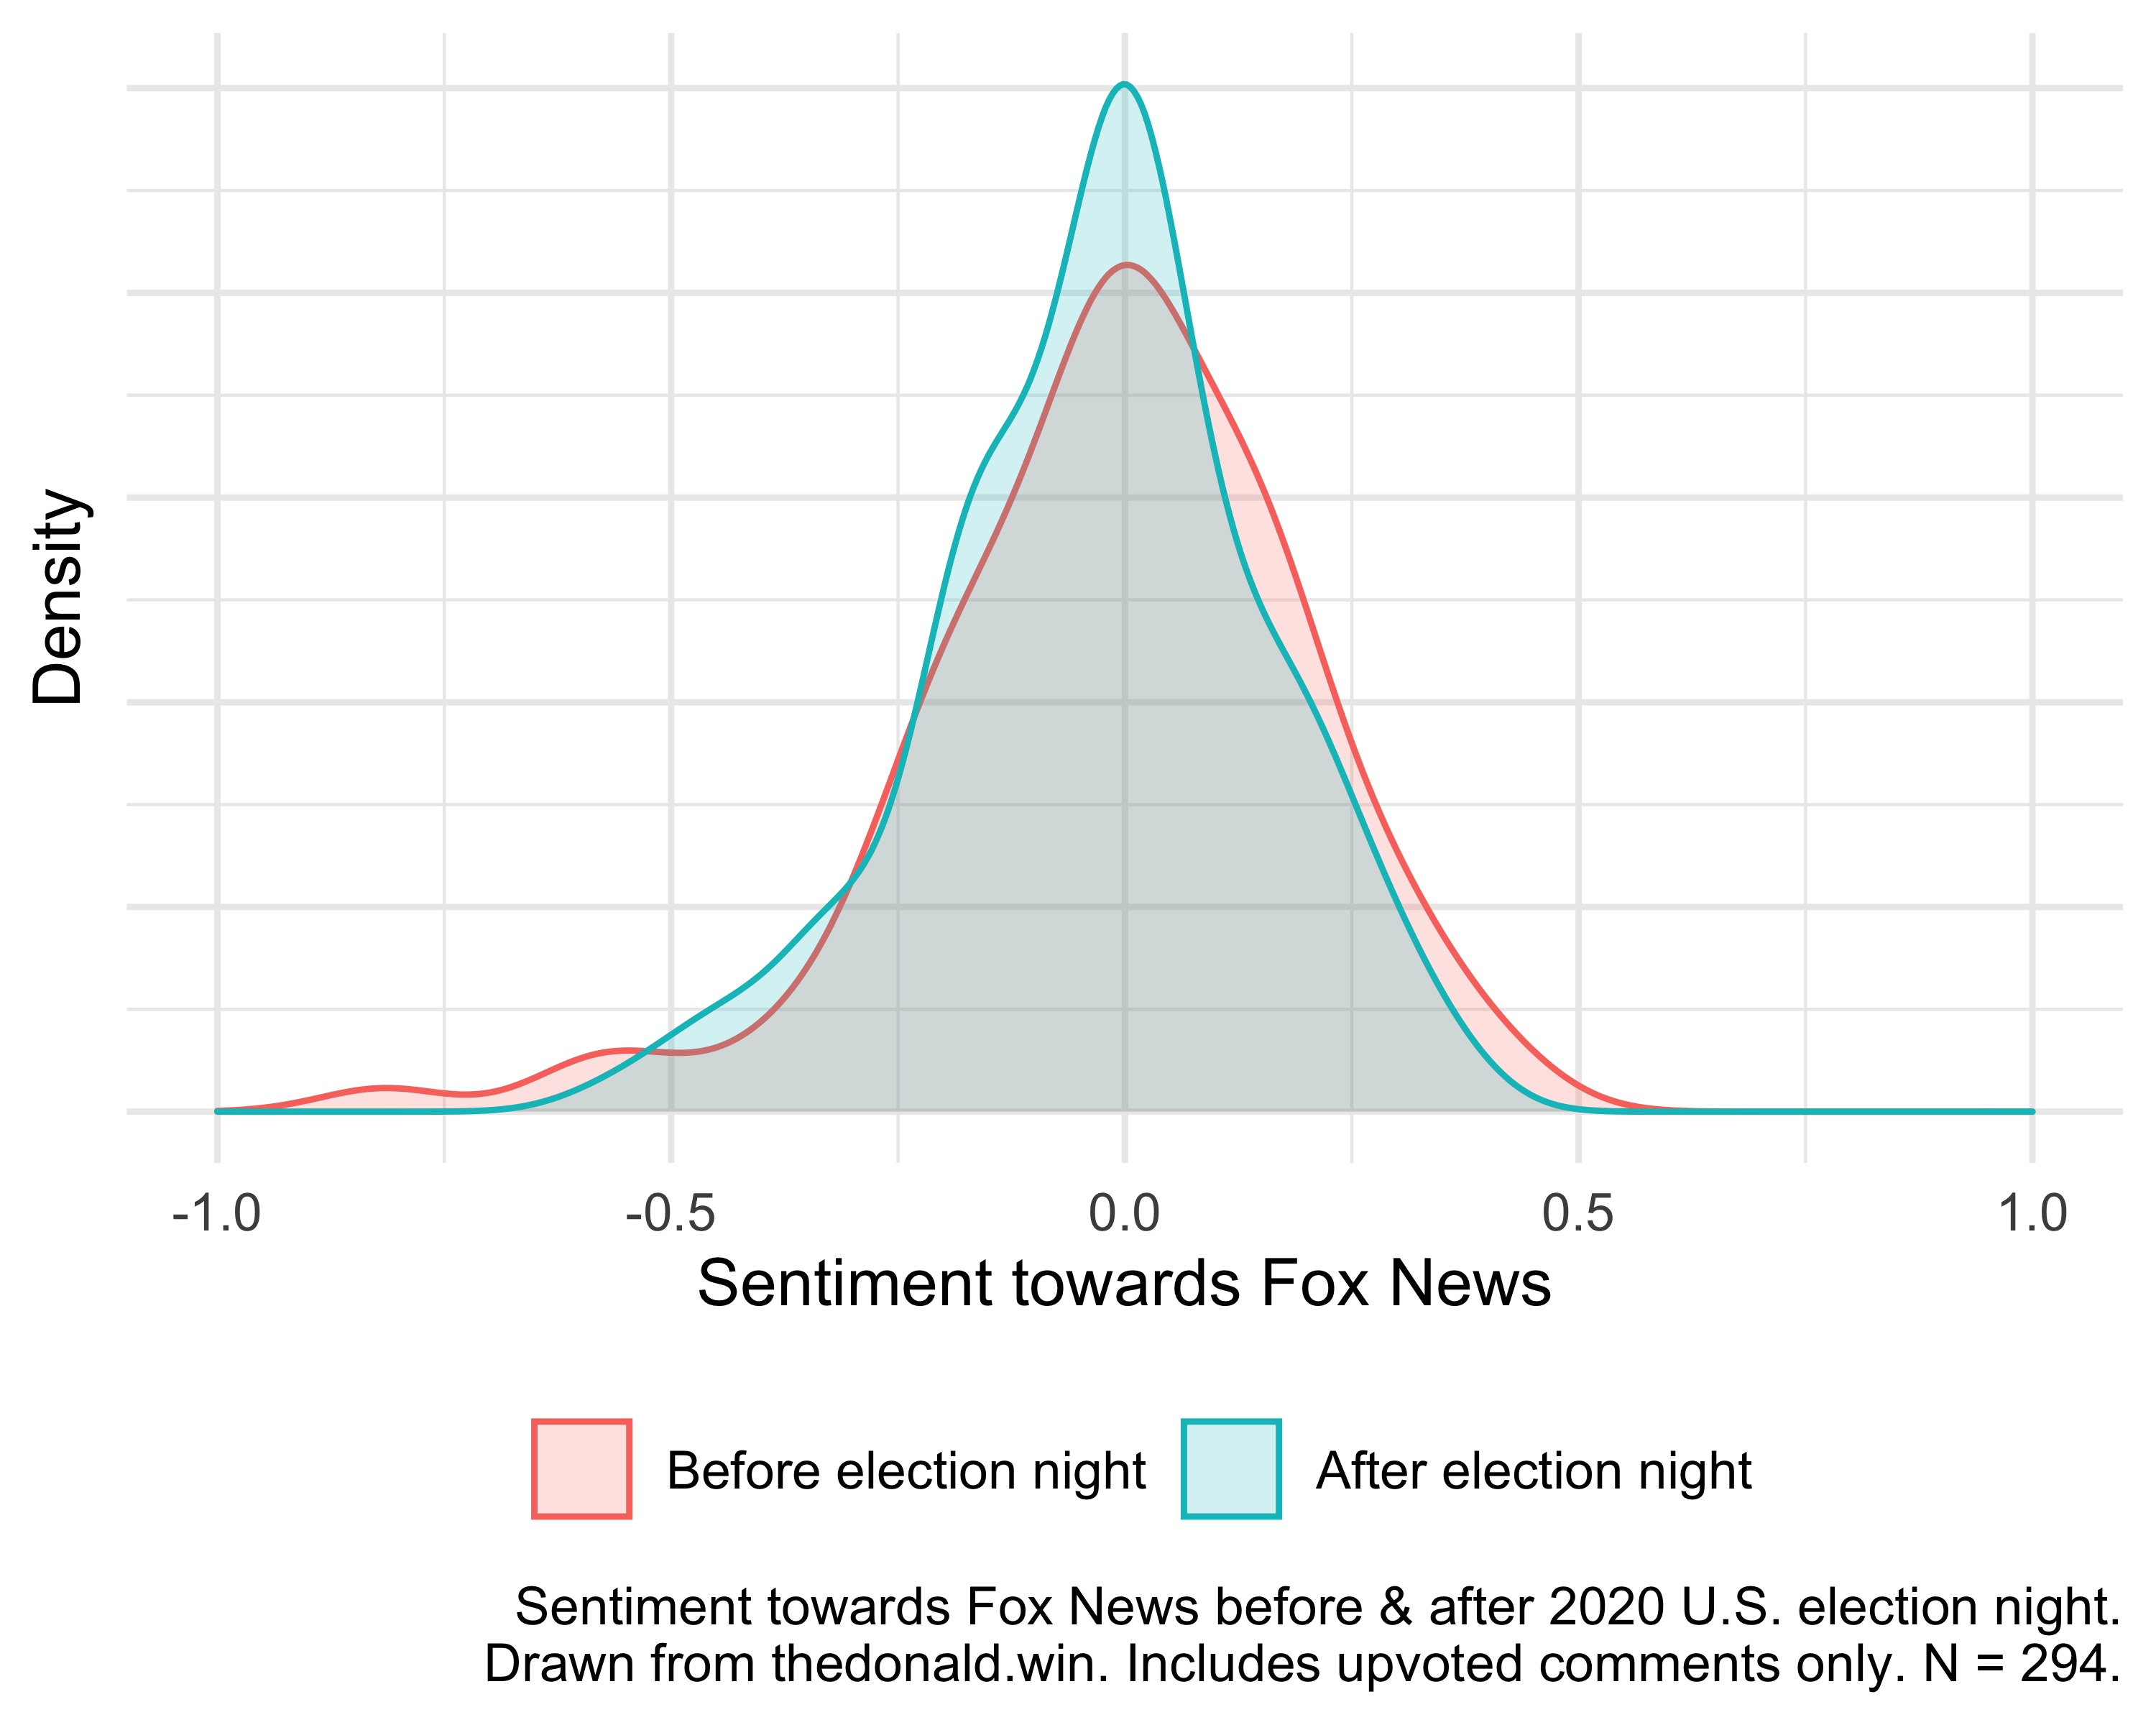 Plot showing sentiment towards Fox News before and after the 2020 U.S. election night.